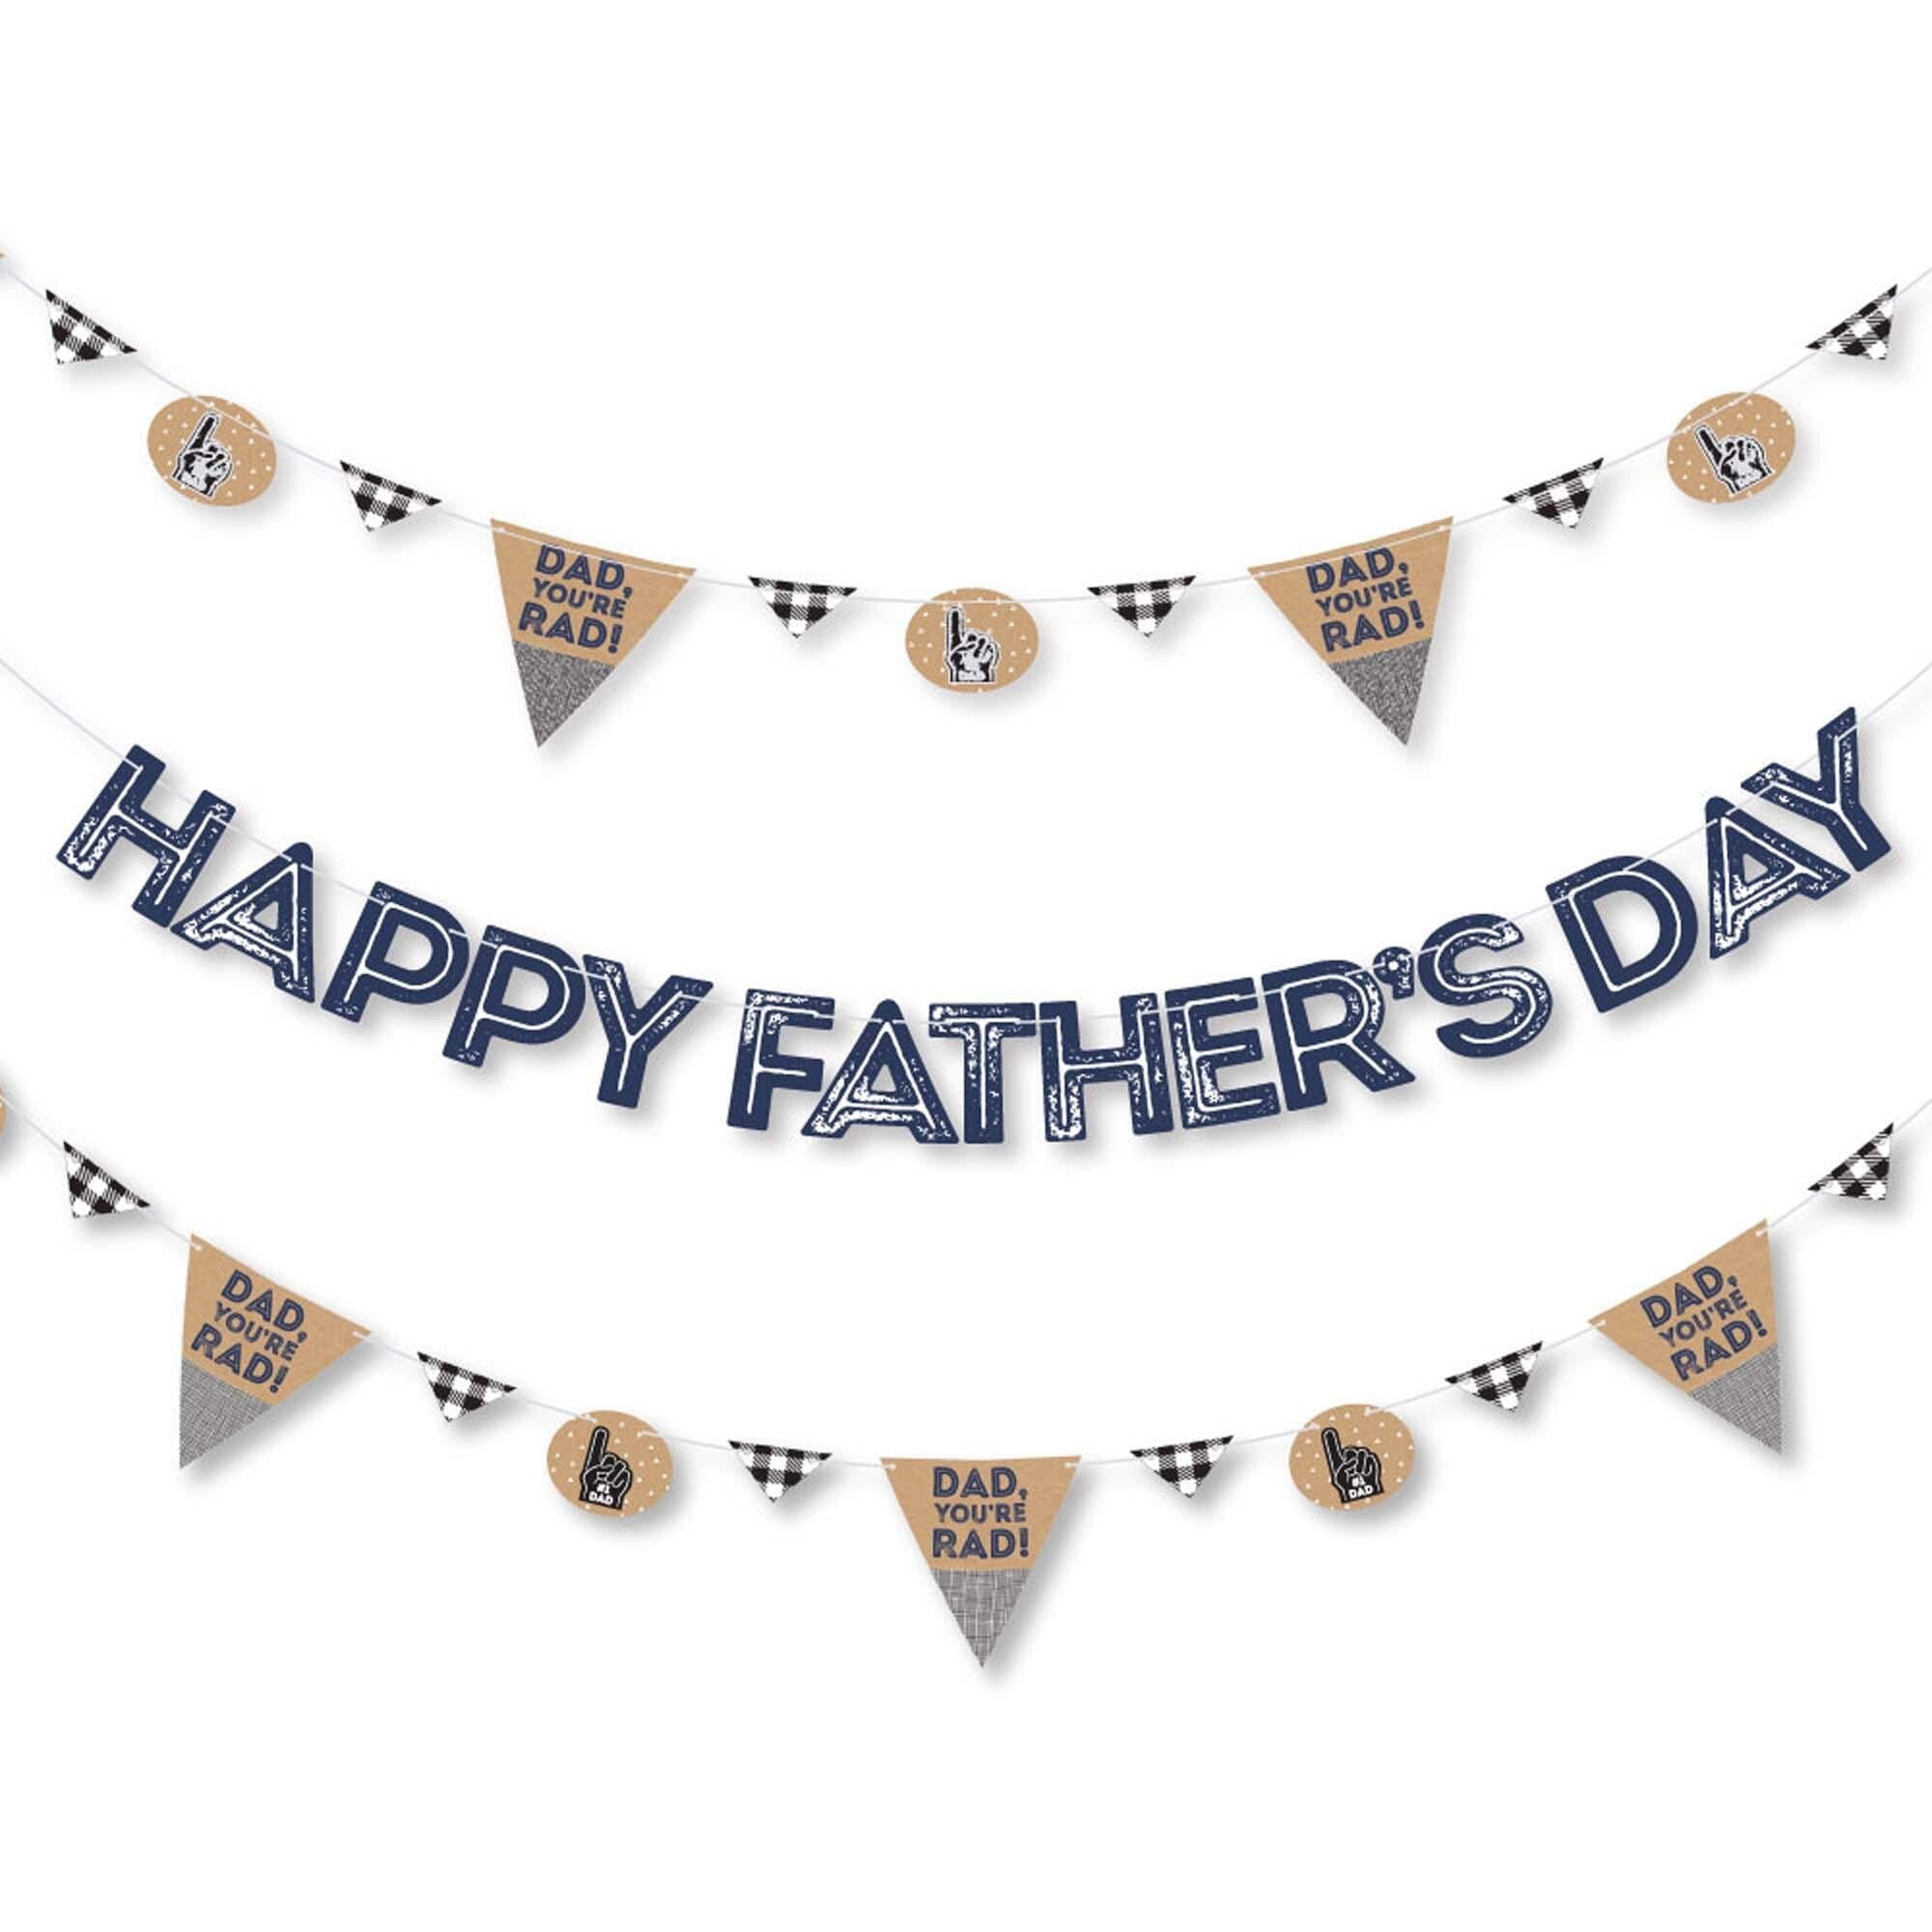 DADDY BIRTHDAY PARTY BANNER FATHER'S DAY BUNTING DECORATION BLACK AND SILVER 